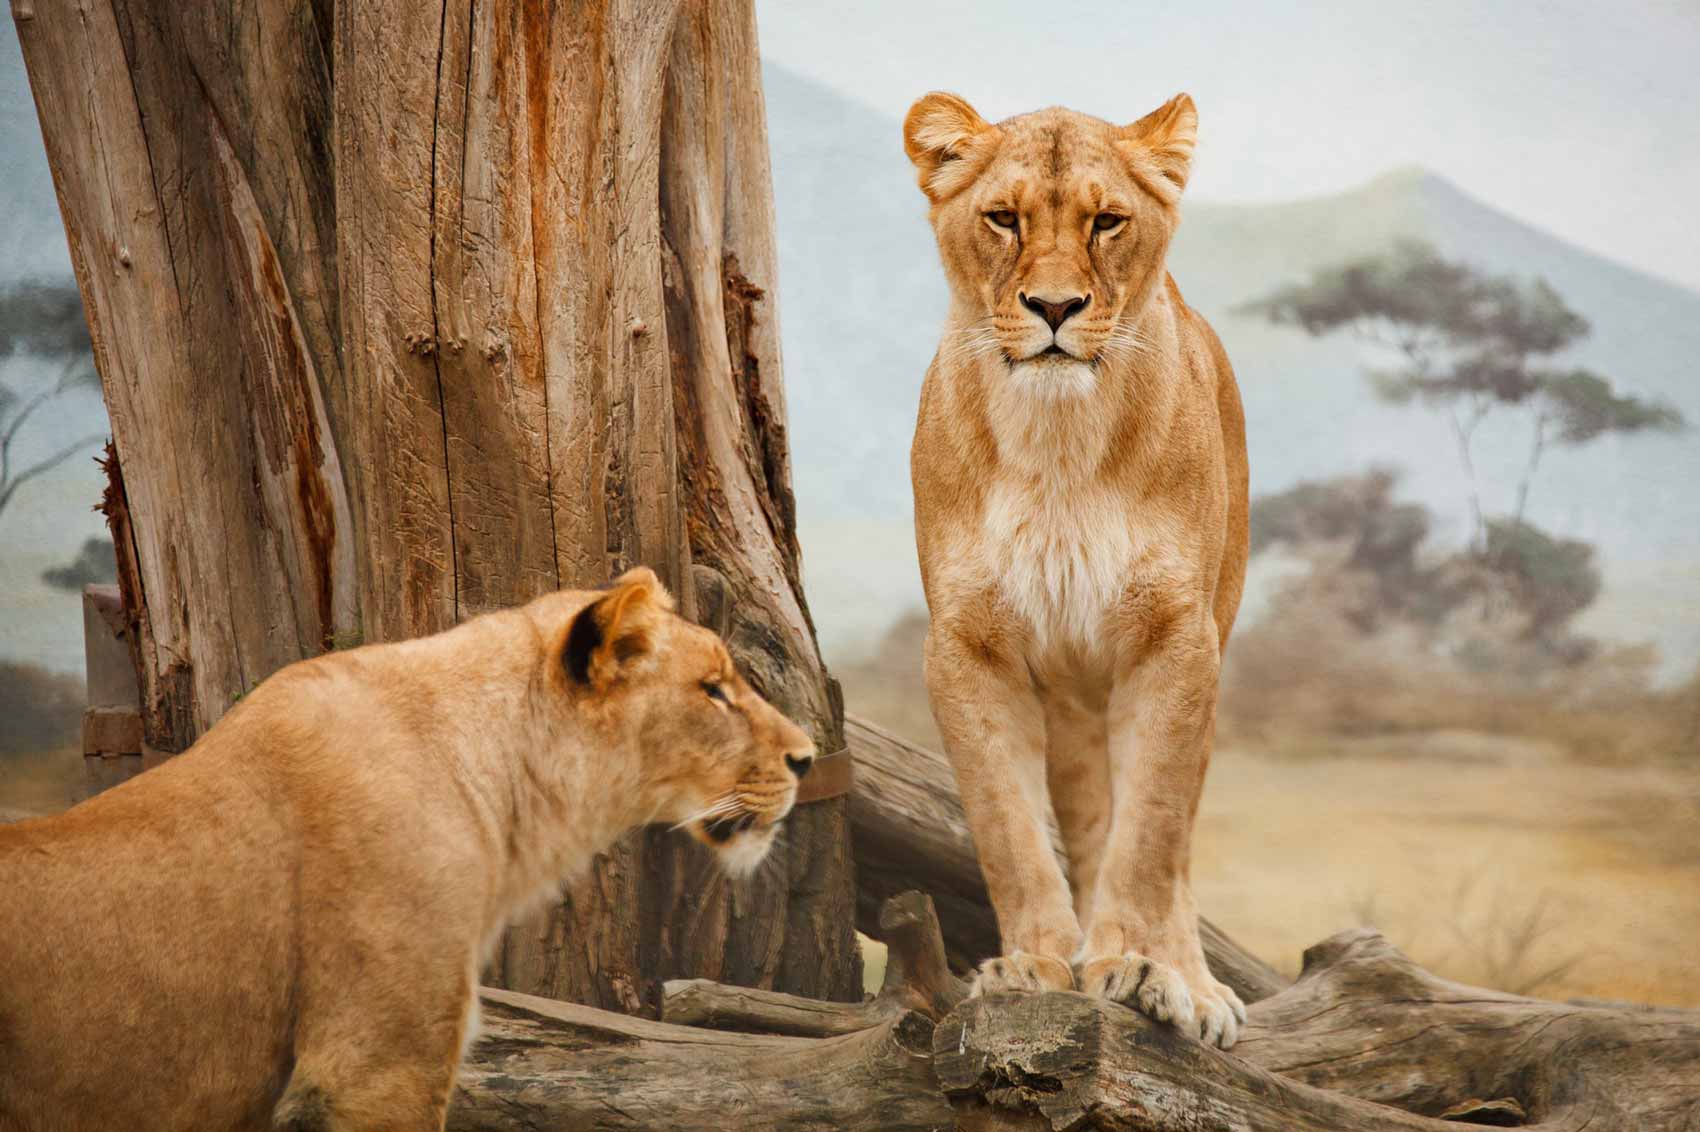 Image of two lions next to a tree